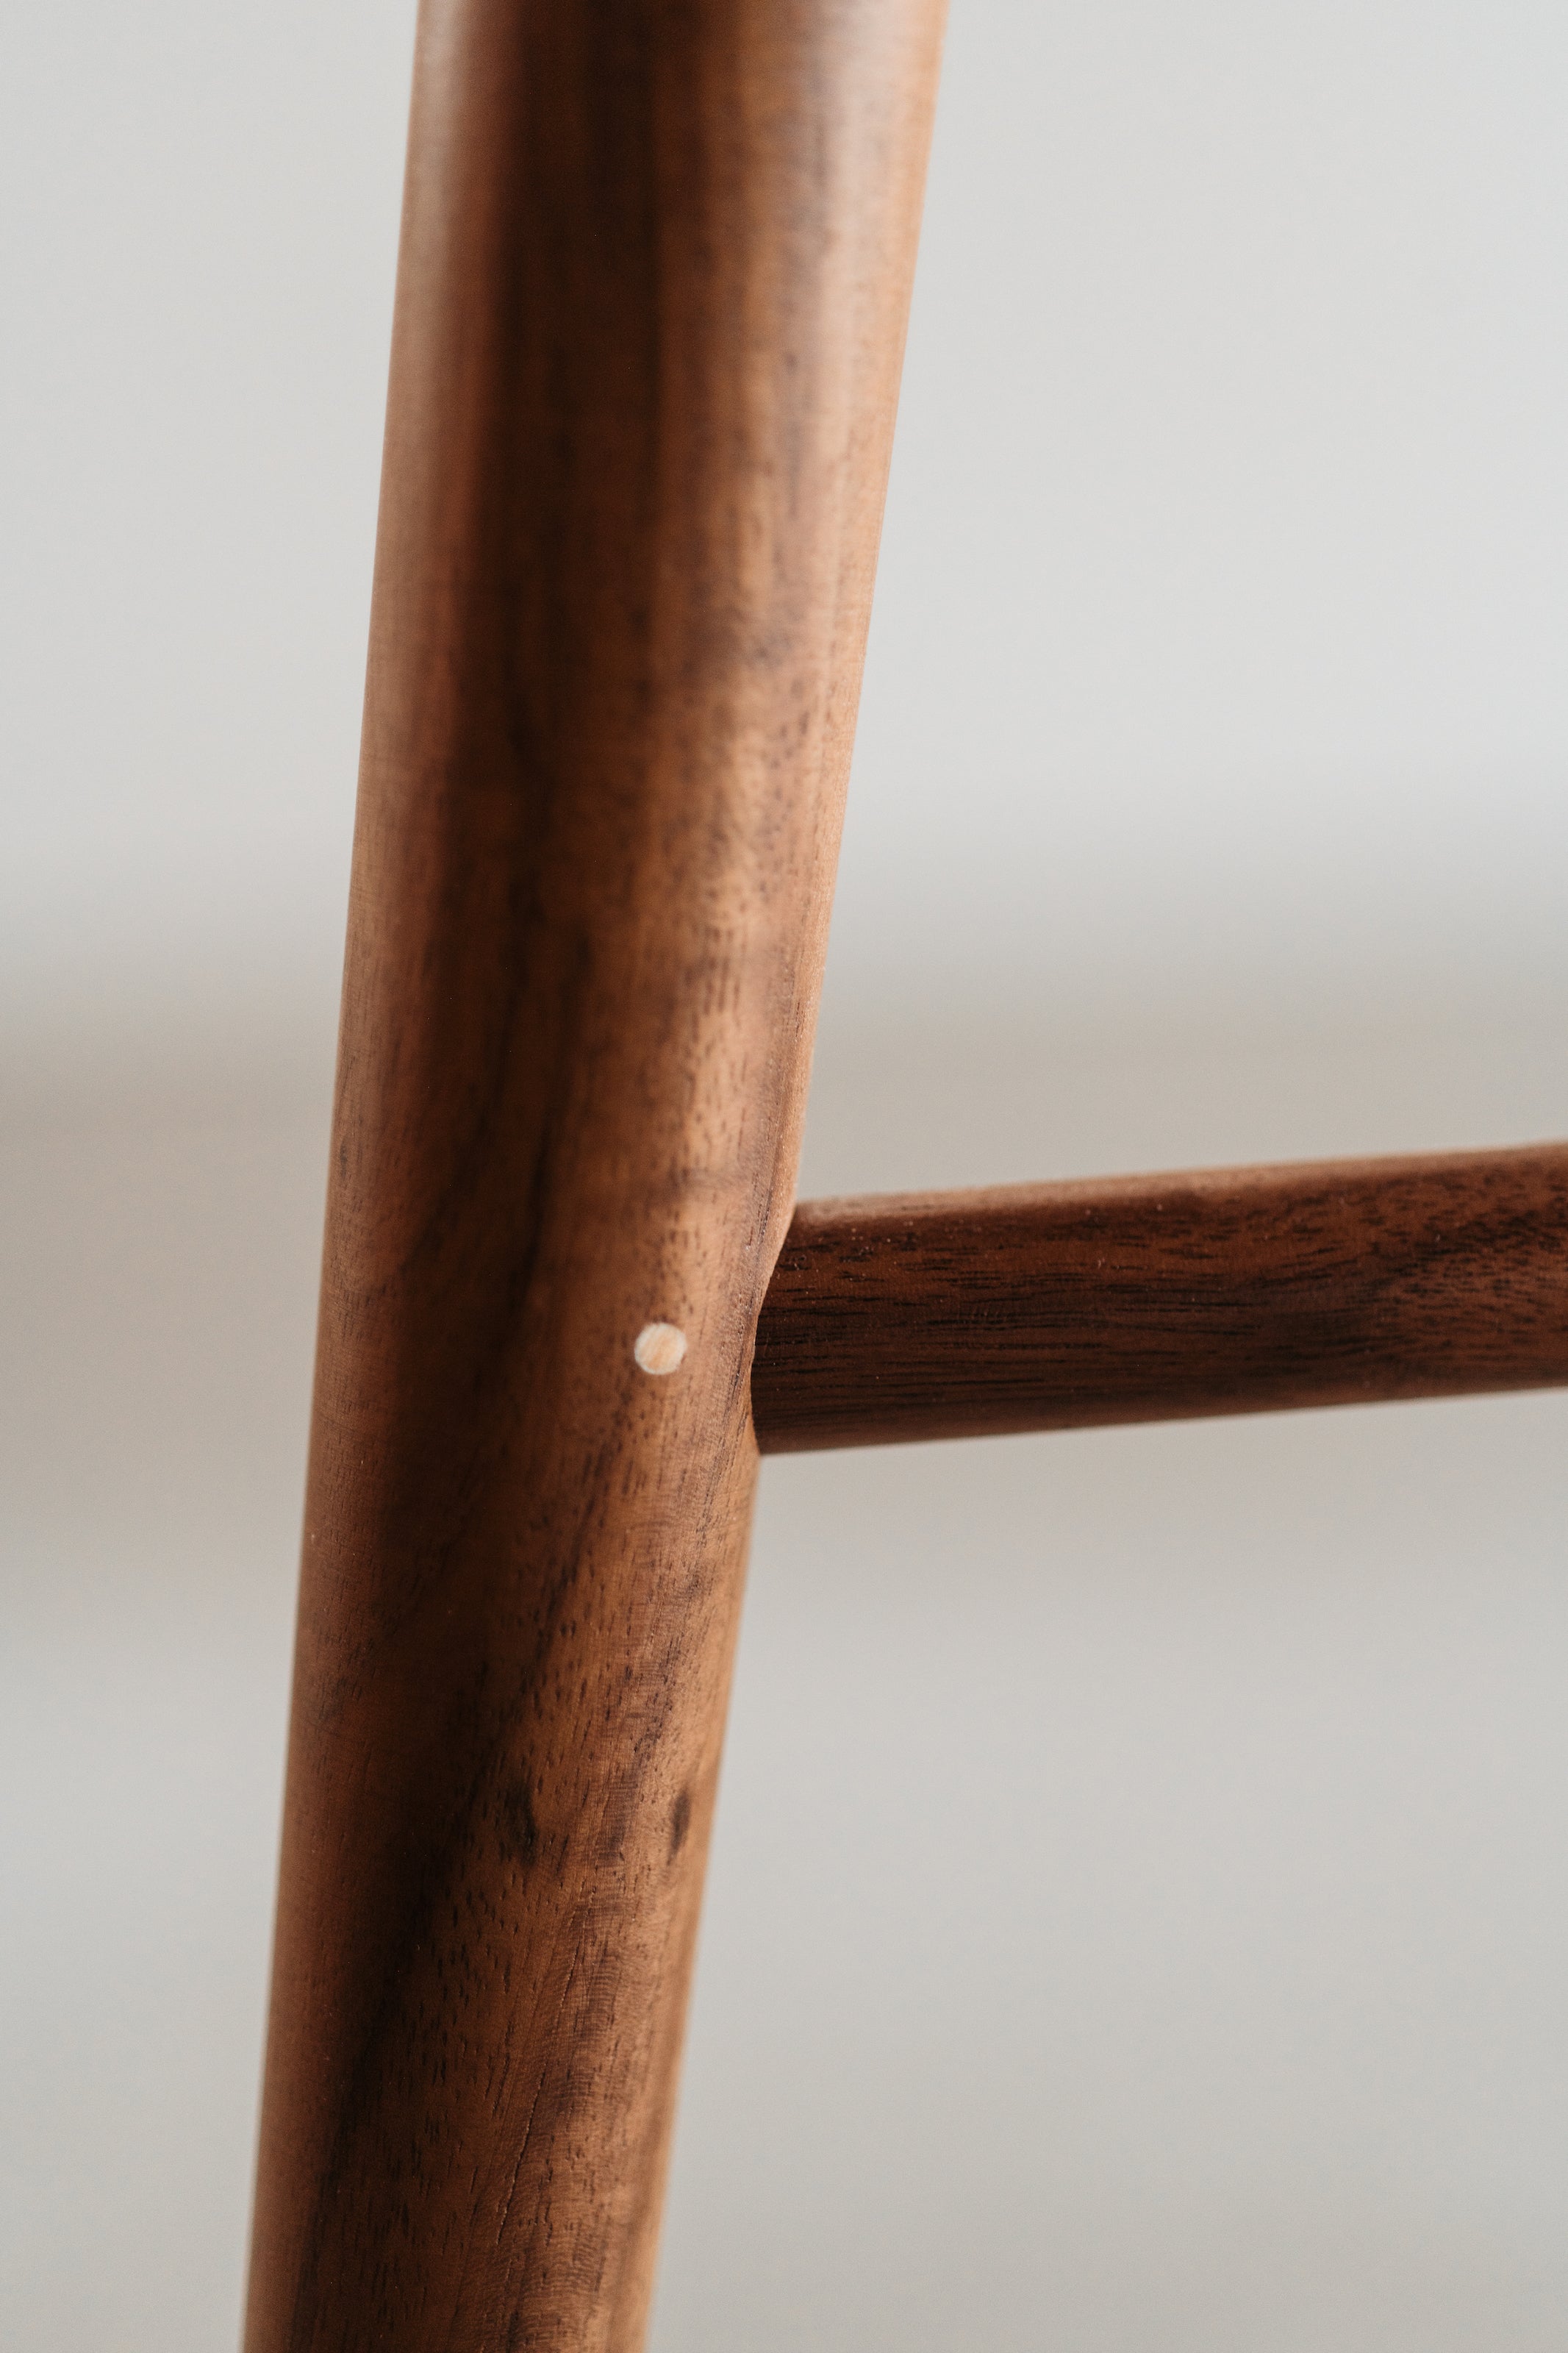 Detail of pinned tenon joinery on Shaker Stool from Chilton Furniture in Maine